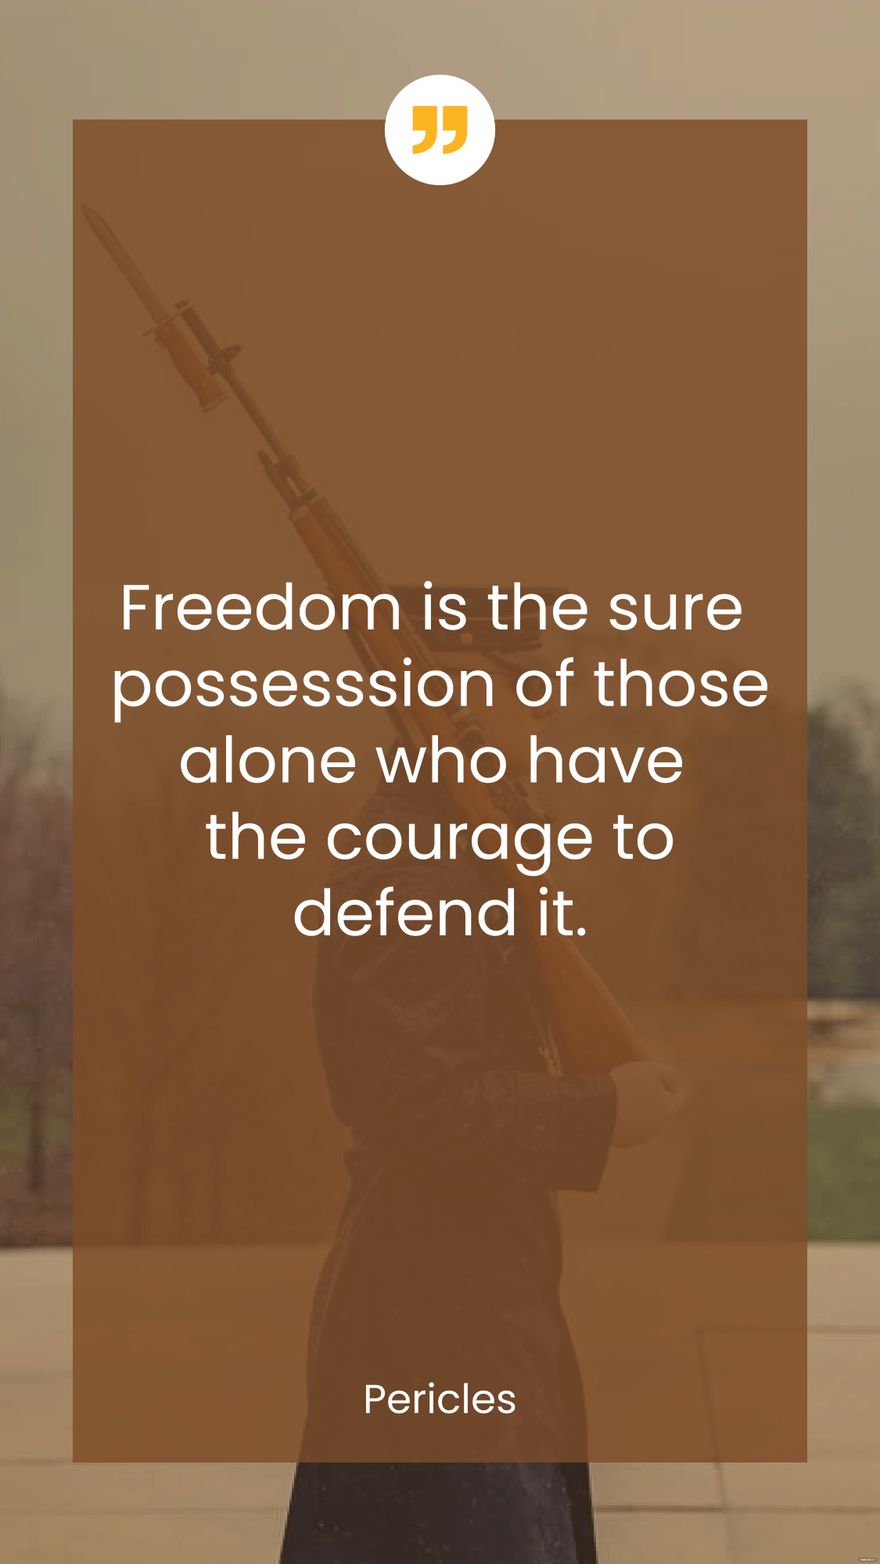 Pericles - Freedom is the sure possession of those alone who have the courage to defend it. in JPG